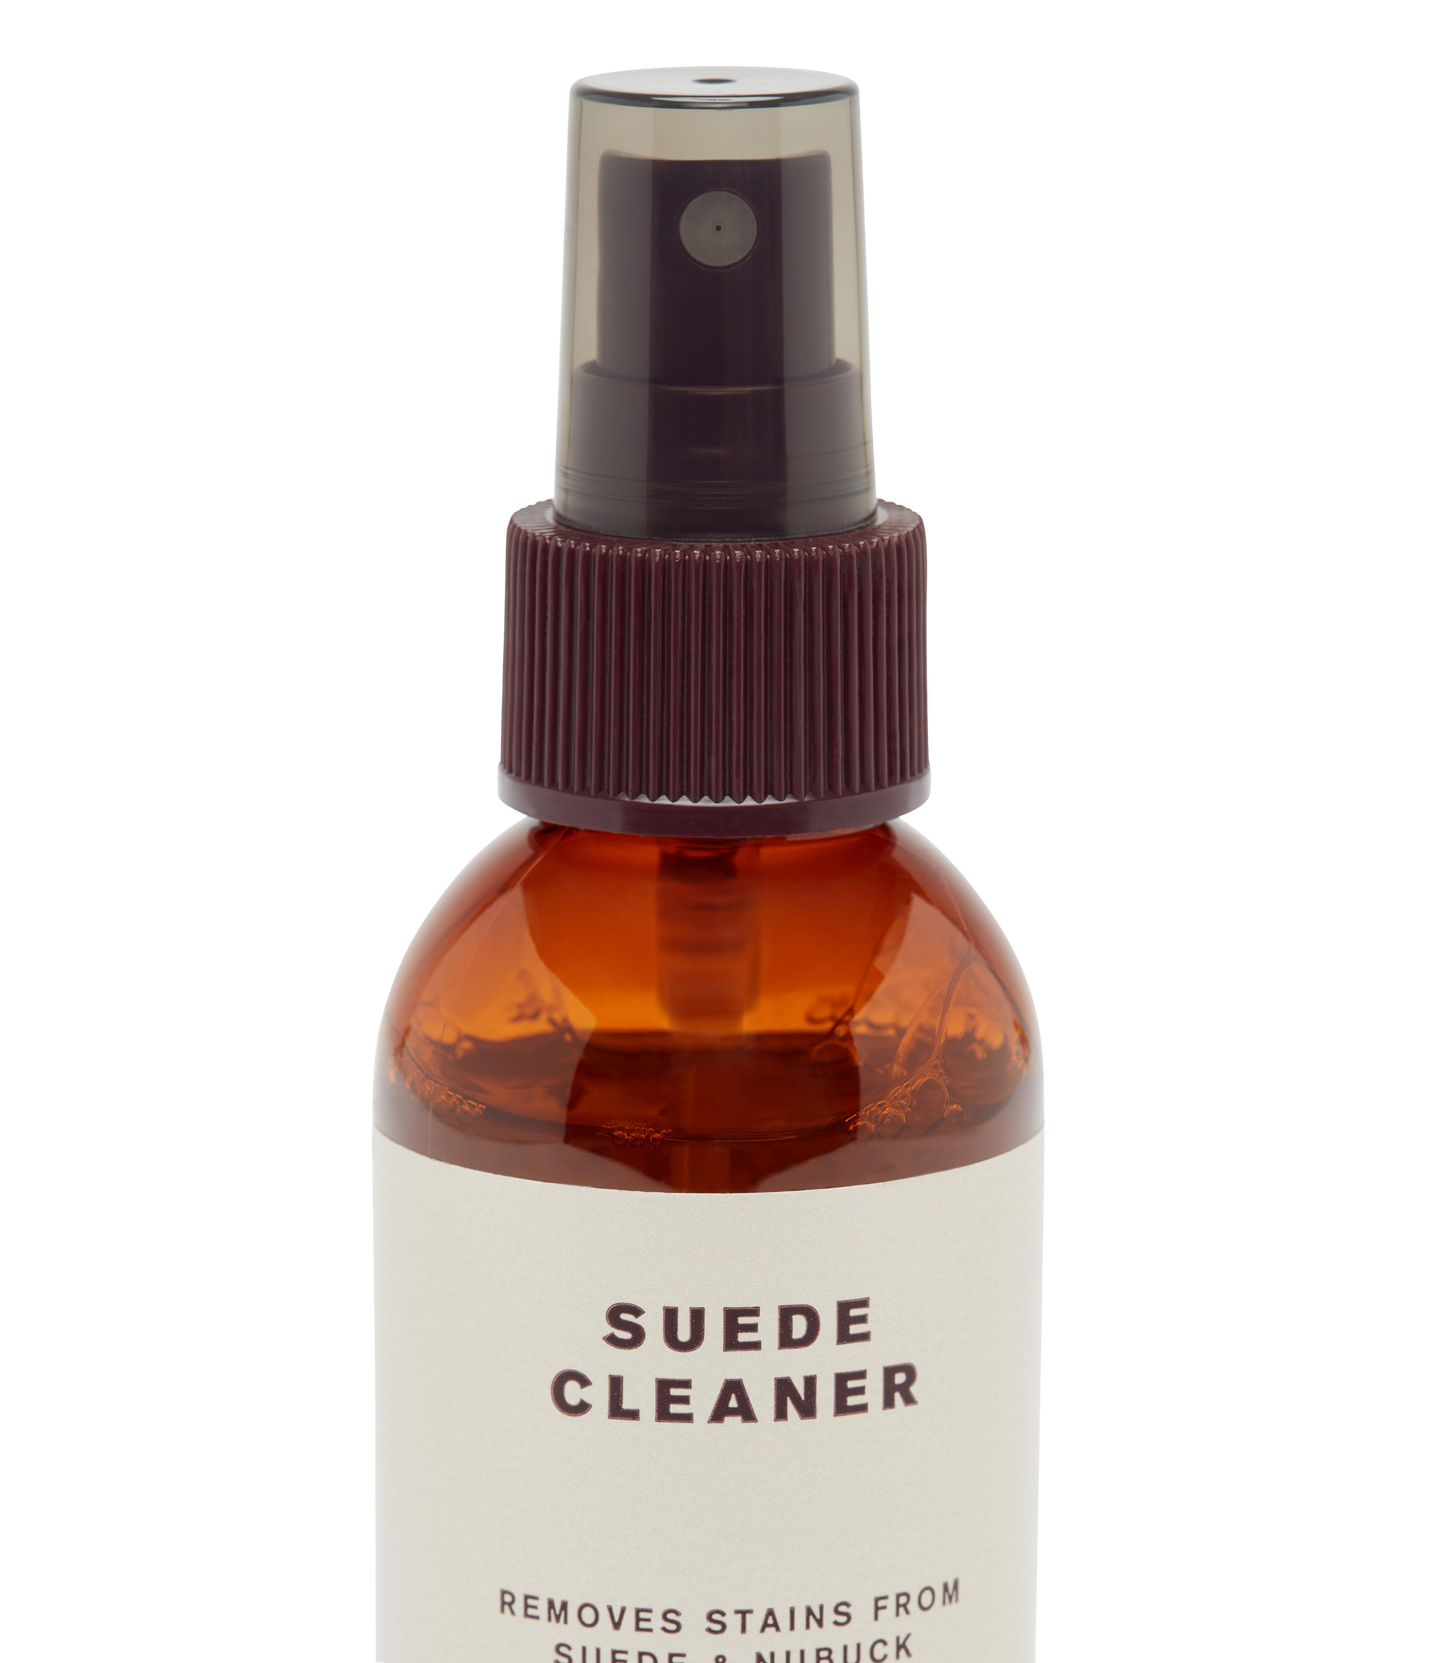 Suede cleaner